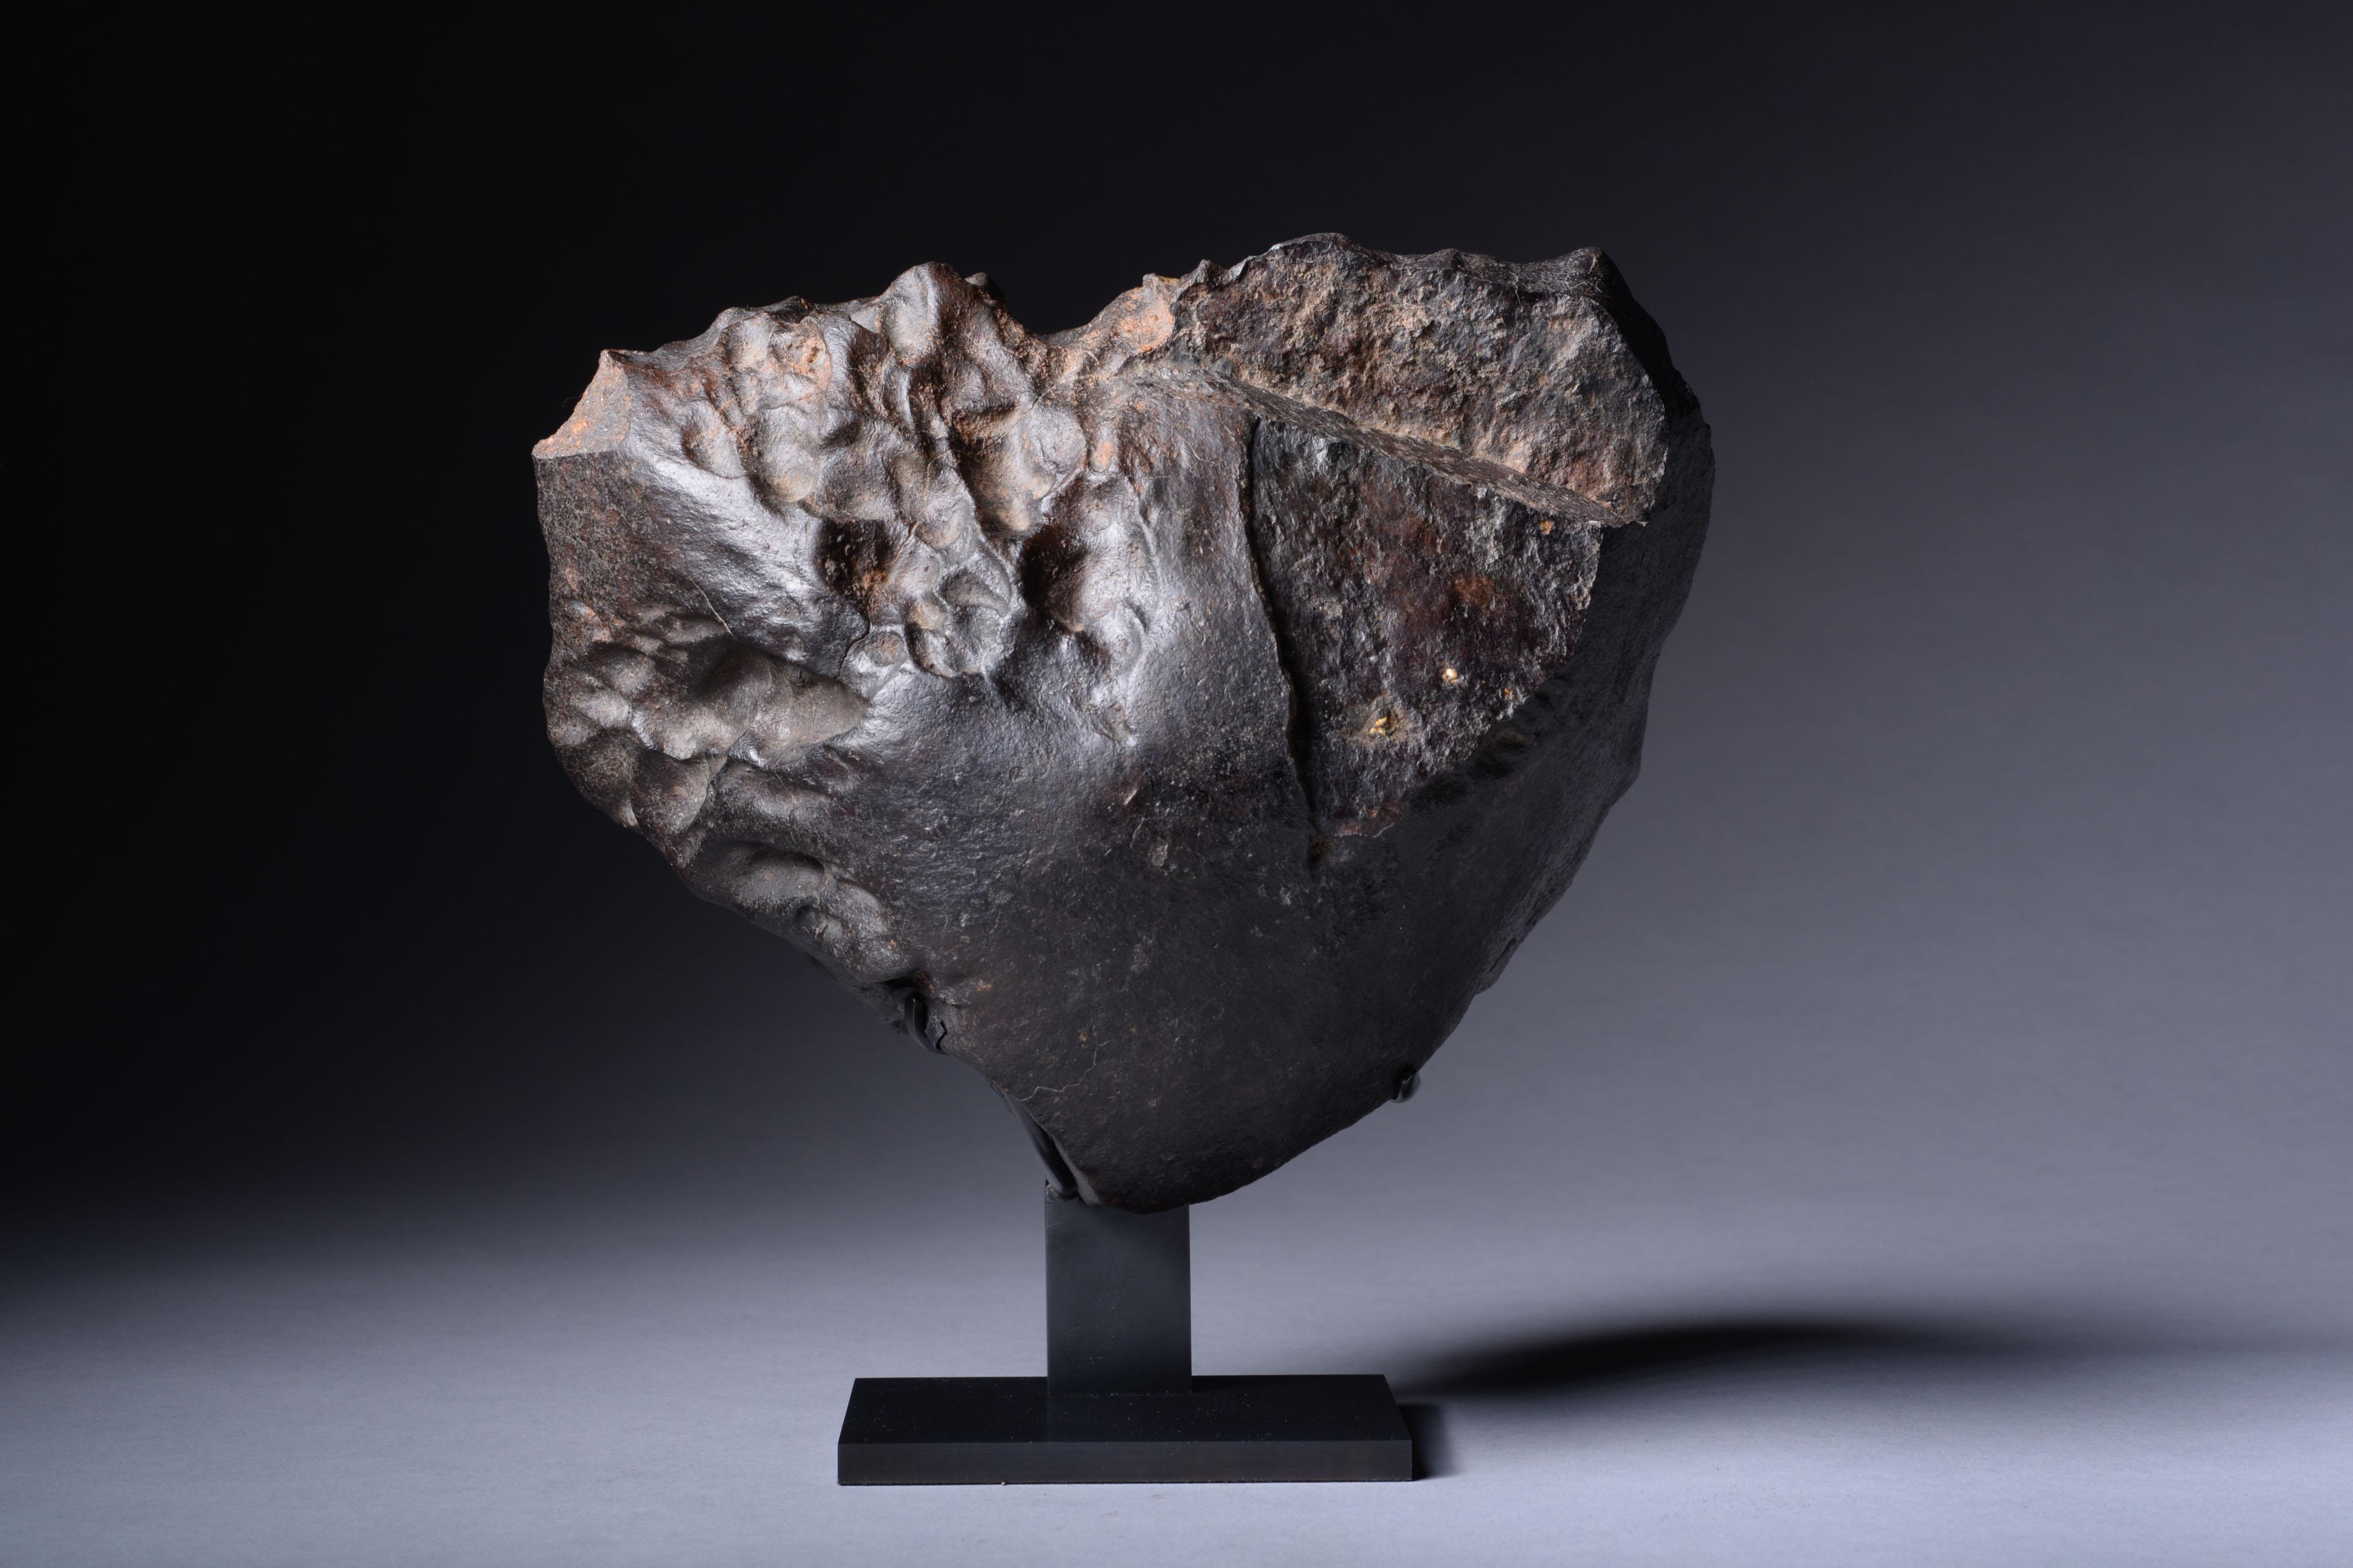 Oriented Stone Meteorite
Chondrite
5.00 kg

Detached from its parent body by a mighty impact, this large, oriented Meteorite travelled over a hundred million miles through space before falling to Earth in the North African desert. Beautiful